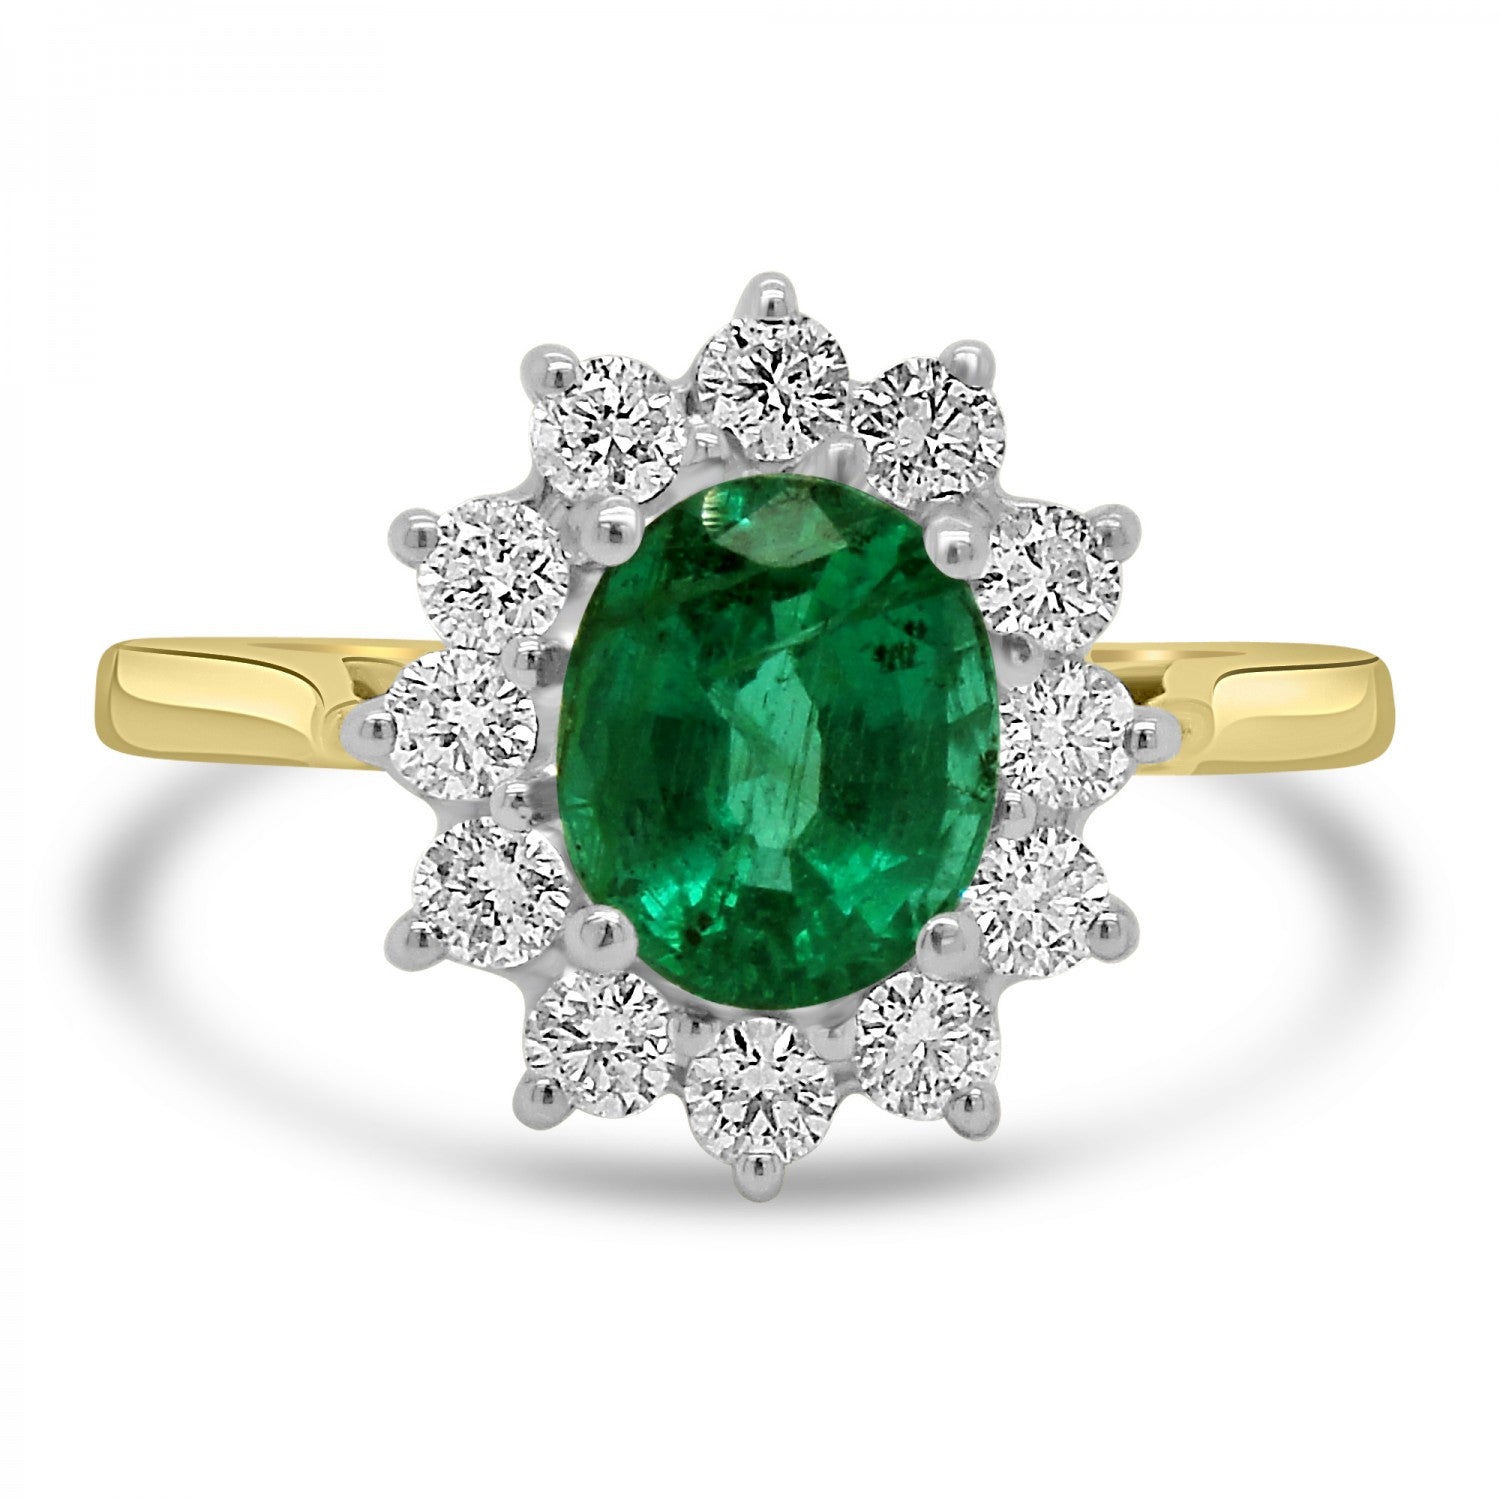 OVAL CUT EMERALD CLUSTER ENGAGEMENT RING